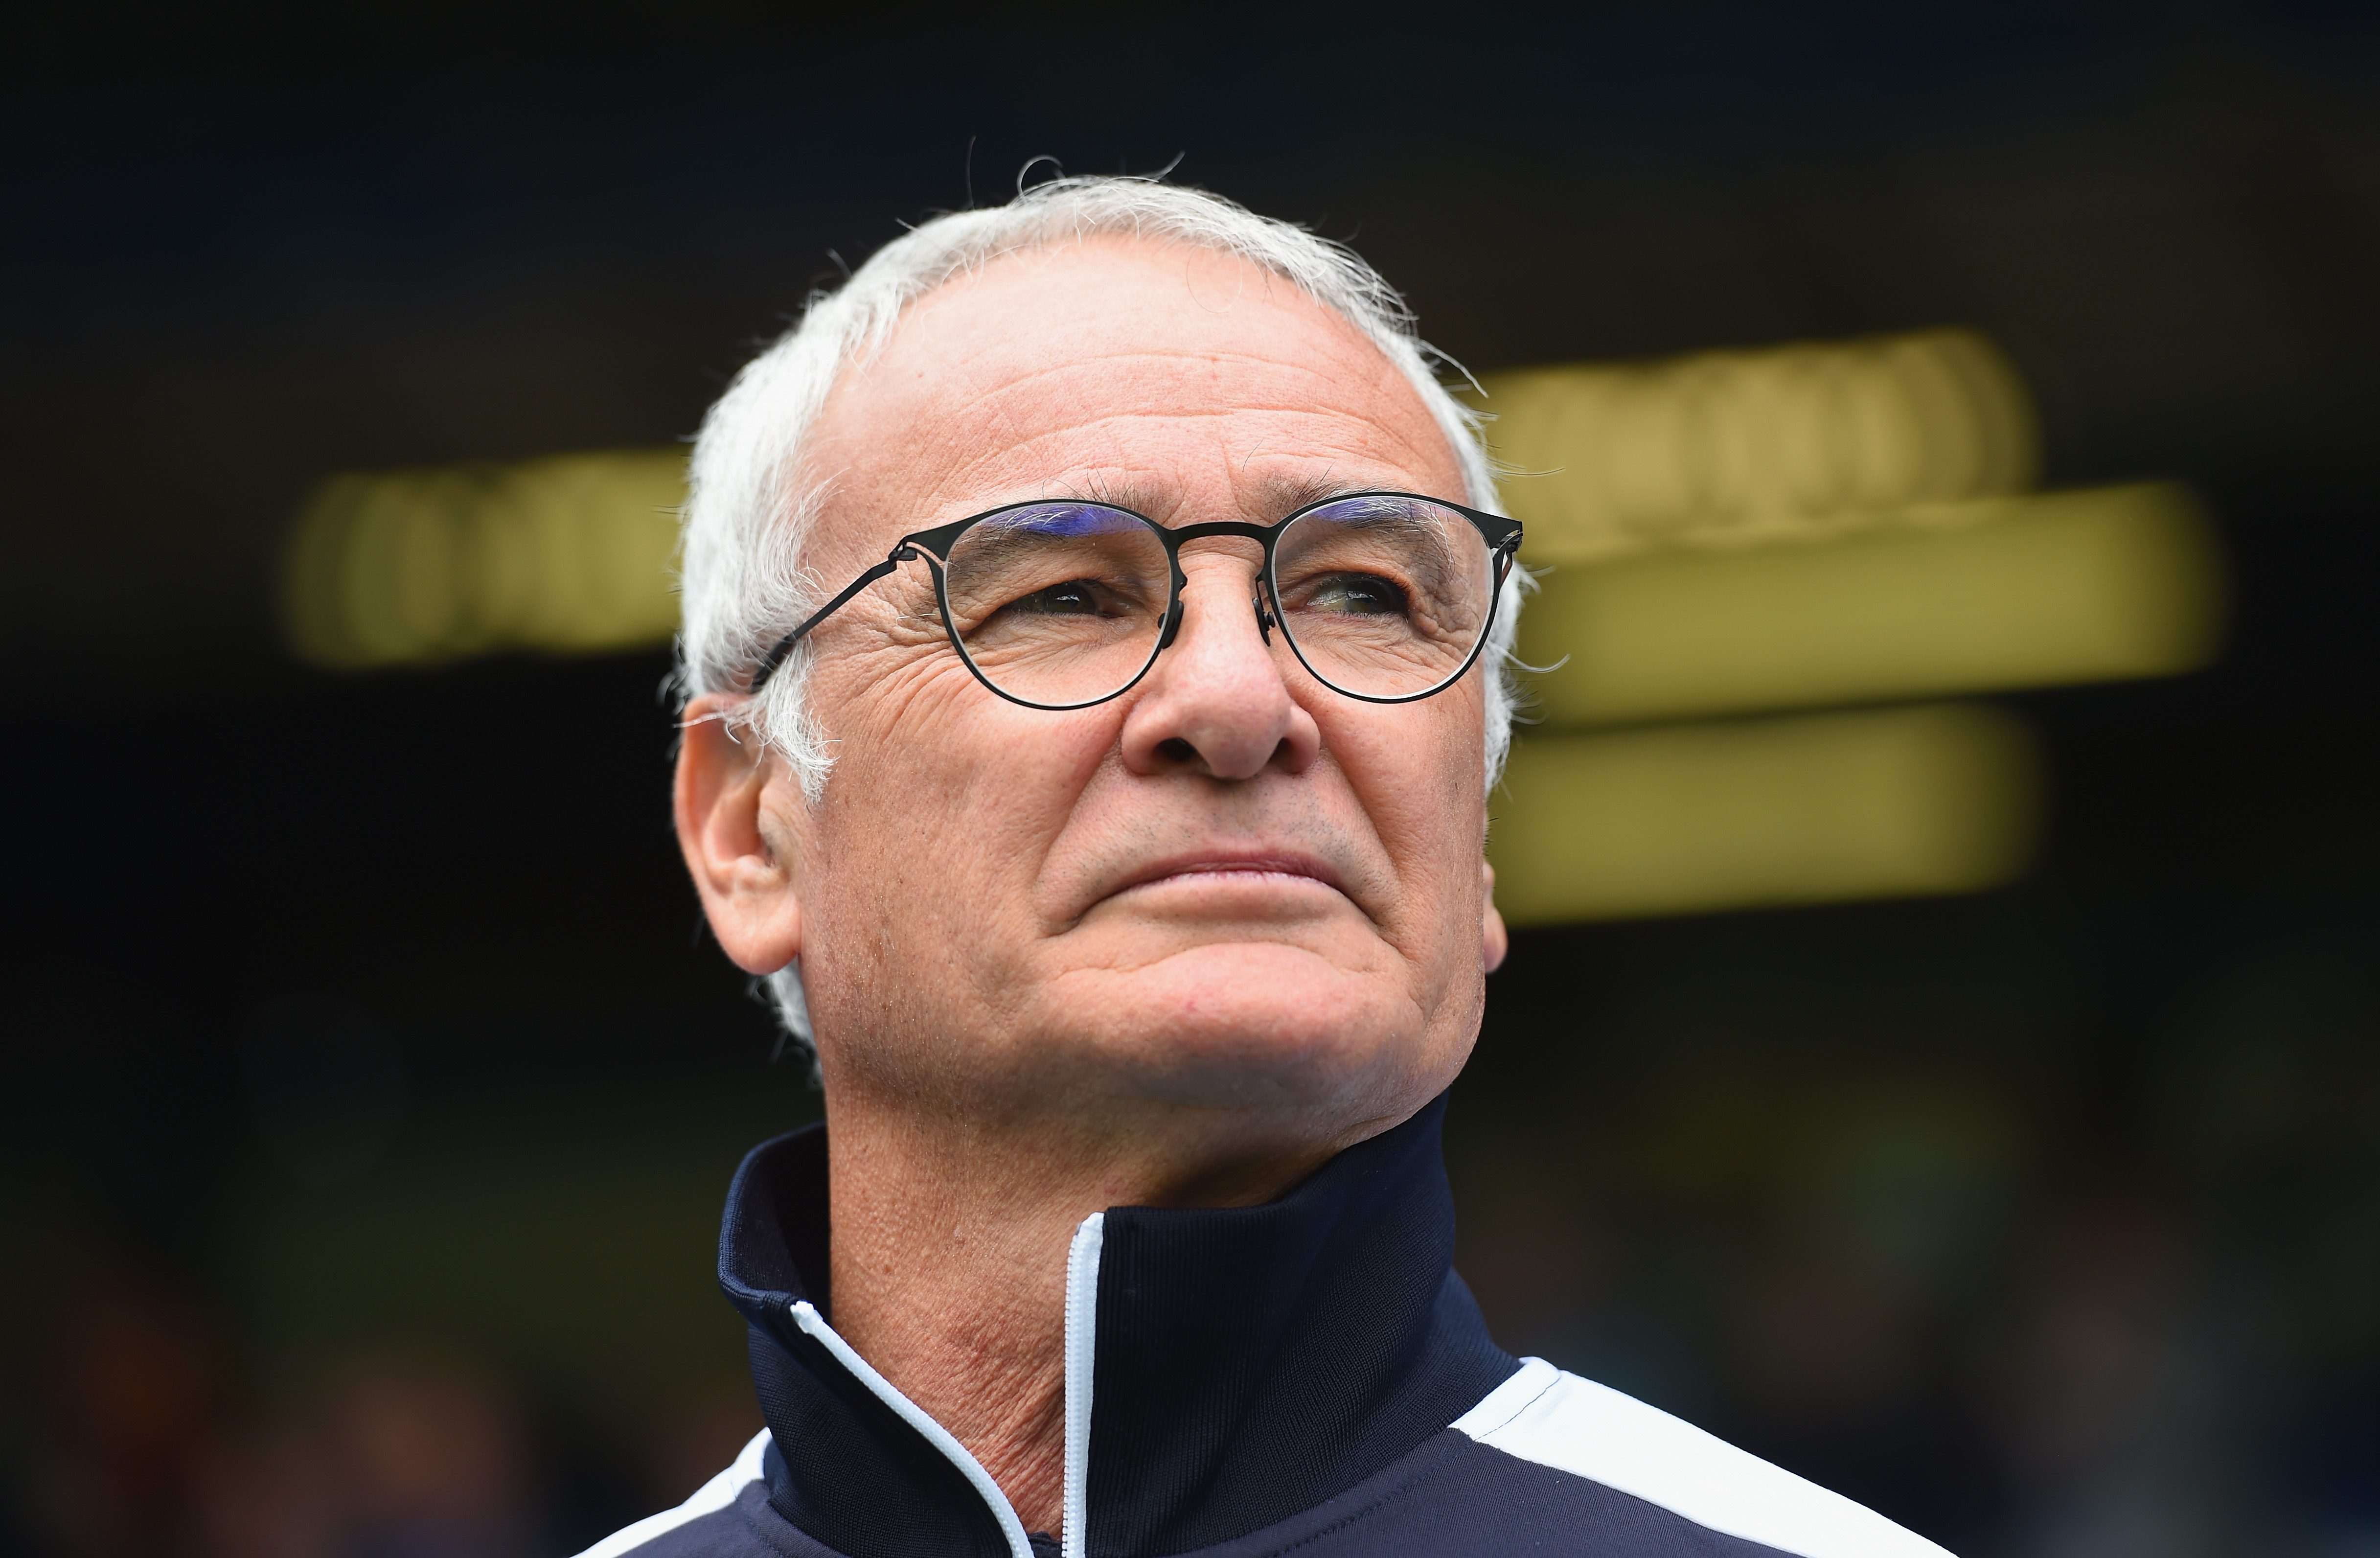 BIRMINGHAM, ENGLAND - AUGUST 01: Leicester City manager Claudio Ranieri during the Pre-Season Friendly match between Birmingham City and Leicester City at St Andrews (stadium) on August 1, 2015 in Birmingham, England. (Photo by Shaun Botterill/Getty Images)